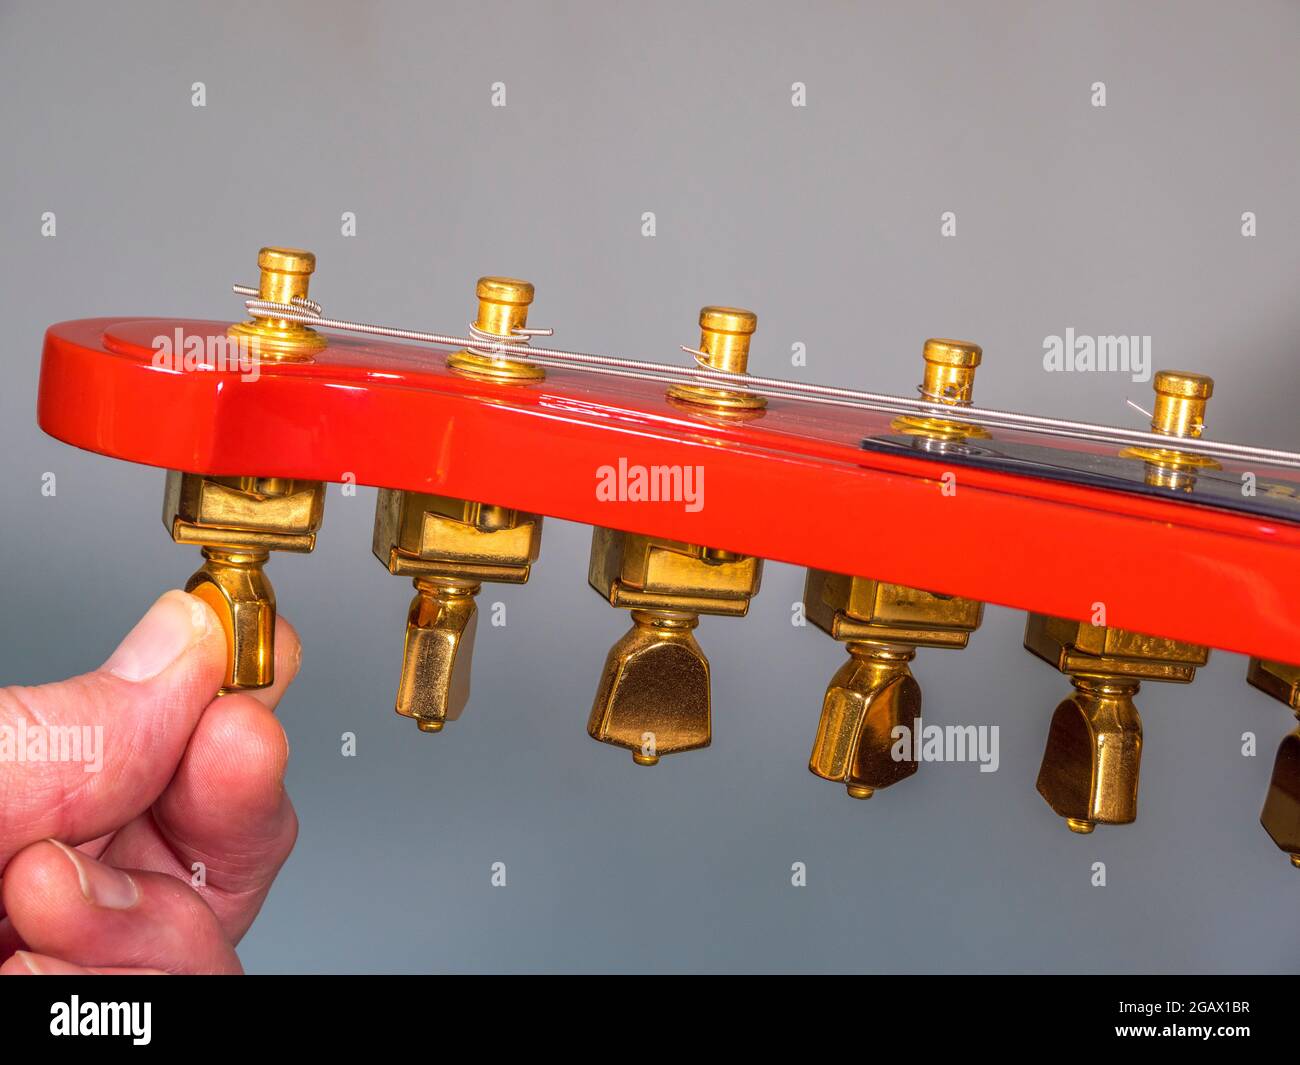 A man’s finger and thumb turning a brass tuning peg on the headstock of a bright red painted electric guitar, to loosen or tighten a wound string. Stock Photo